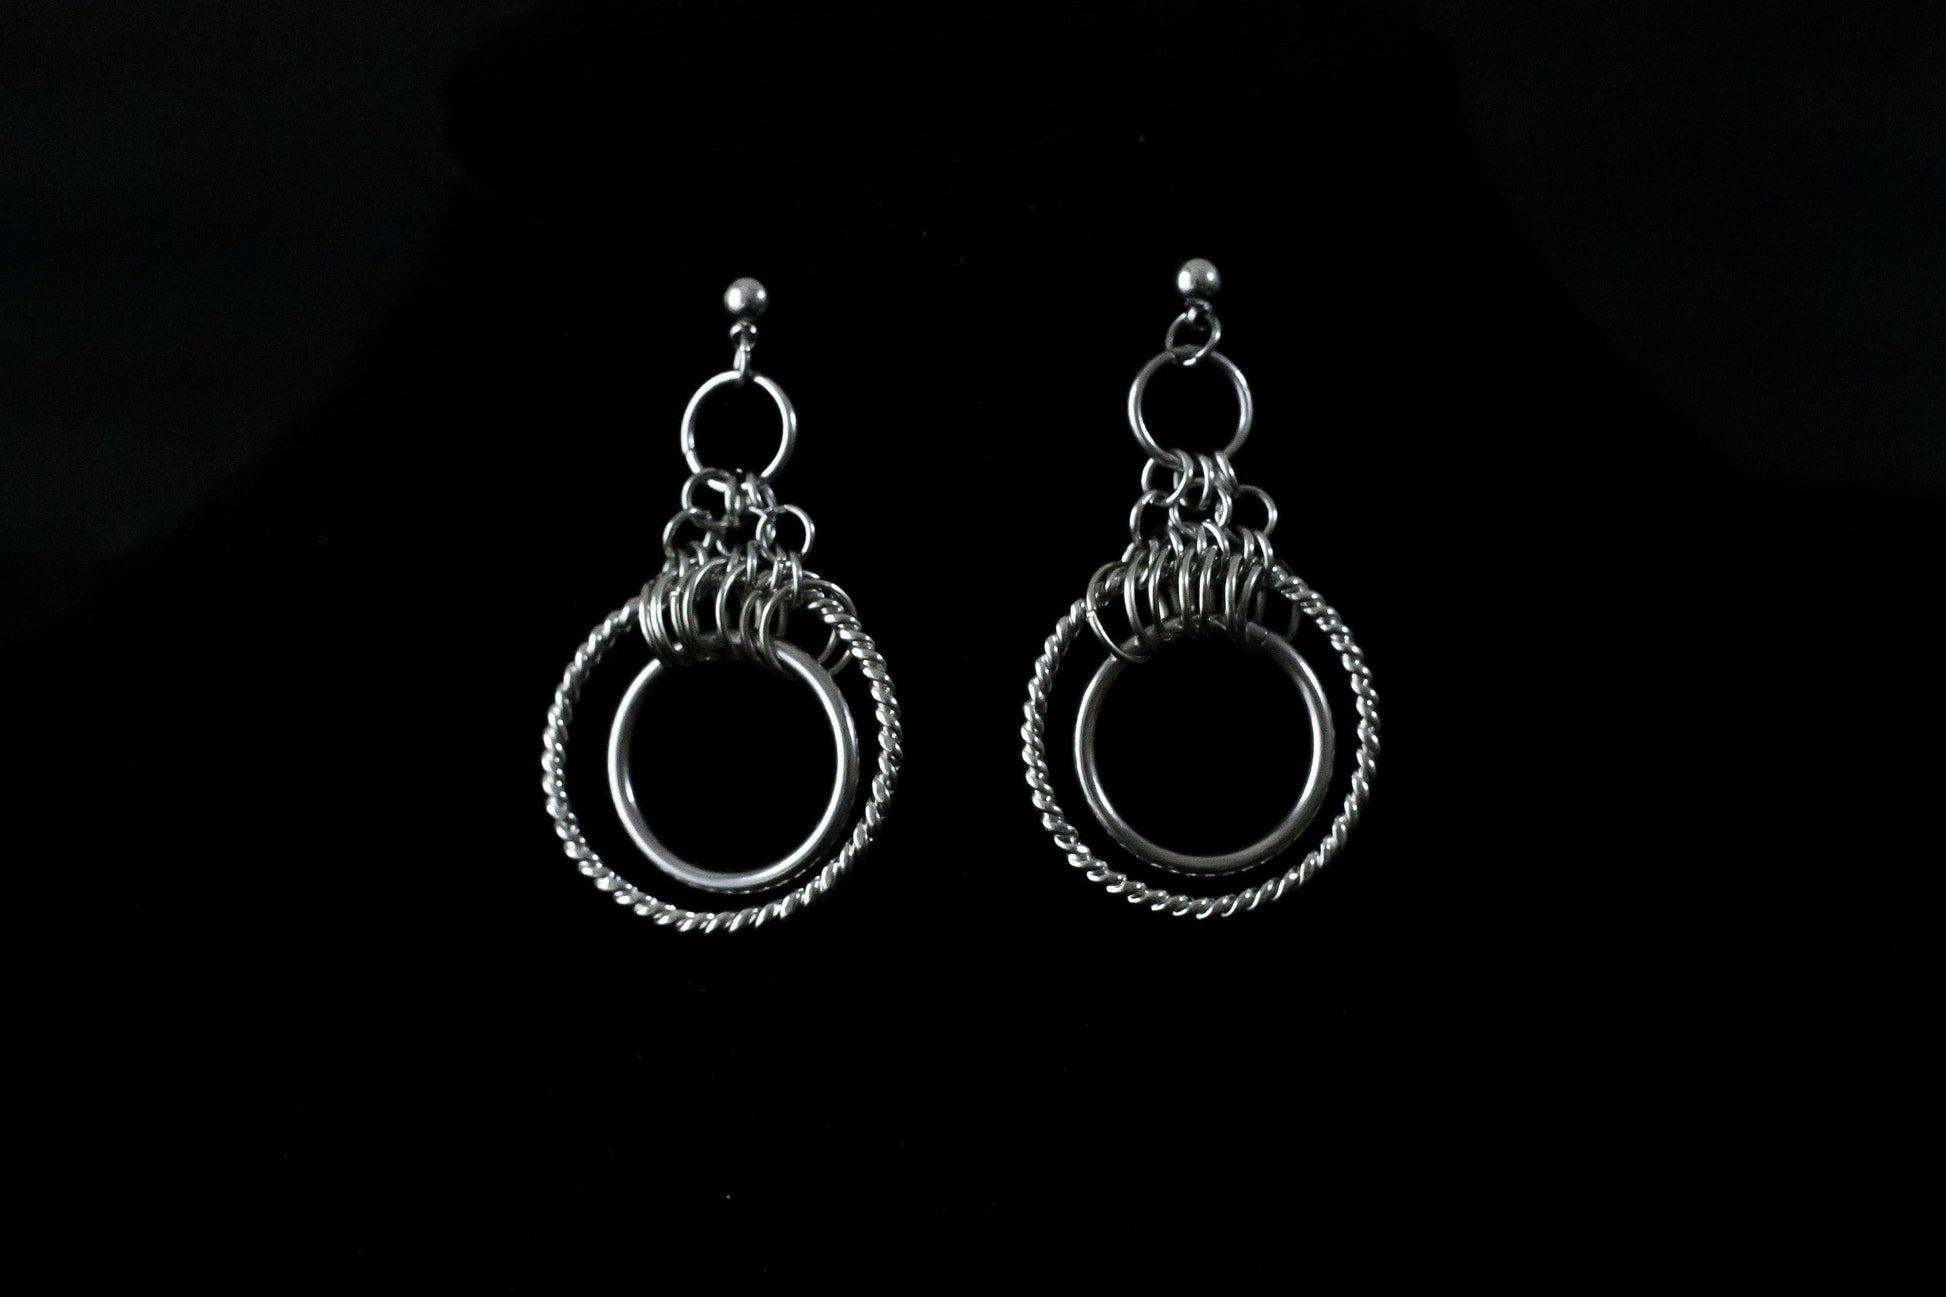 A pair of double hoop earrings, elegantly crafted in a silver tone, with a smaller hoop nestled within a larger one, both connected by a set of intricate chain links. These Myril Jewels earrings encapsulate a neo-gothic charm, ideal for those seeking a statement piece for Halloween, punk, or everyday gothic-chic ensembles. They are a standout addition to any festival outfit or as a bold jewelry gift for a goth girlfriend.